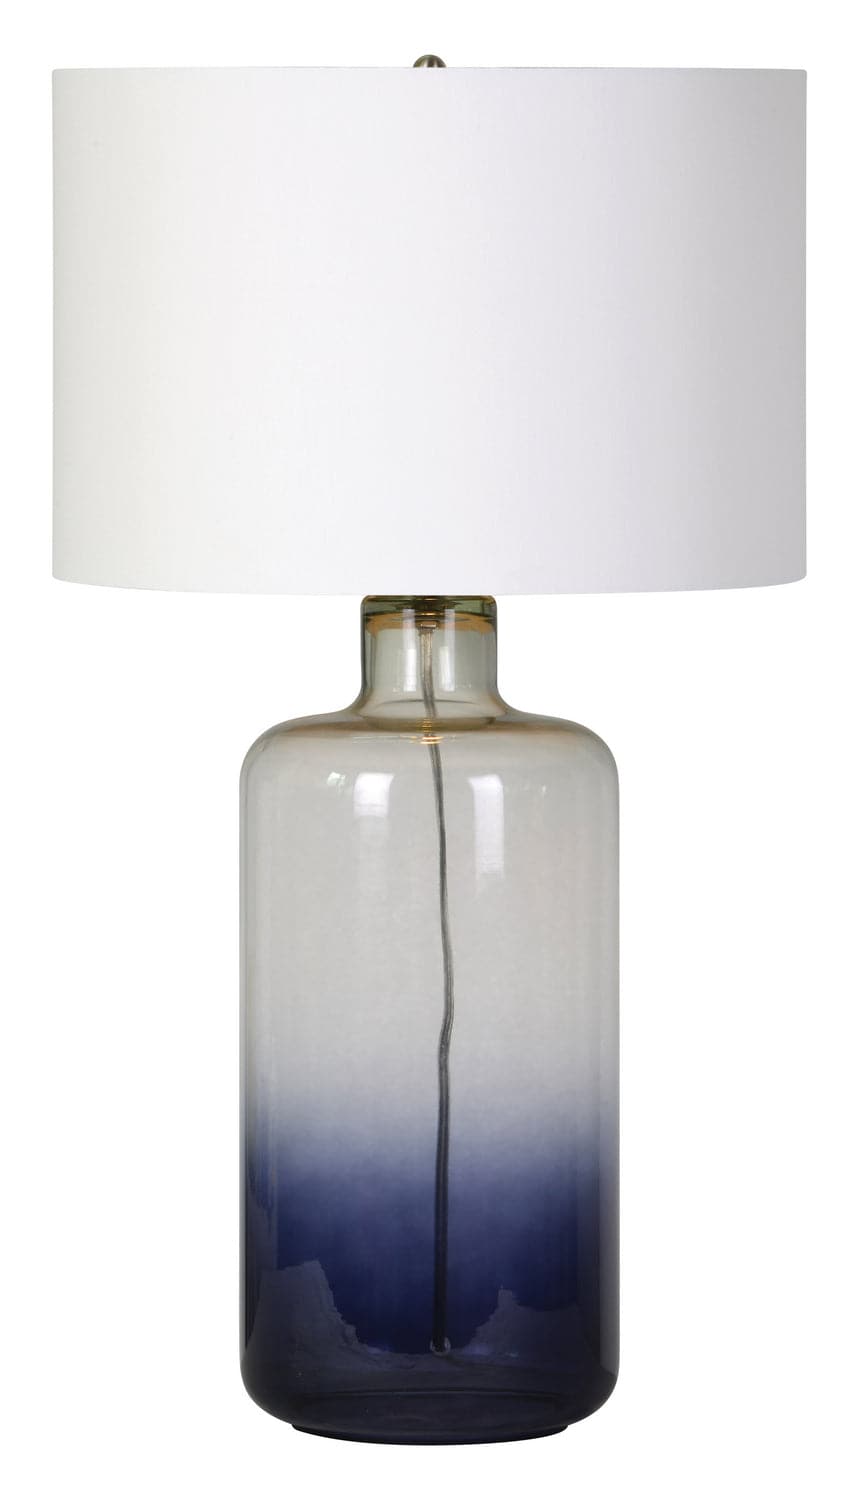 Renwil - LPT587 - One Light Table Lamp - Nightfall - Blue Ombre Glass